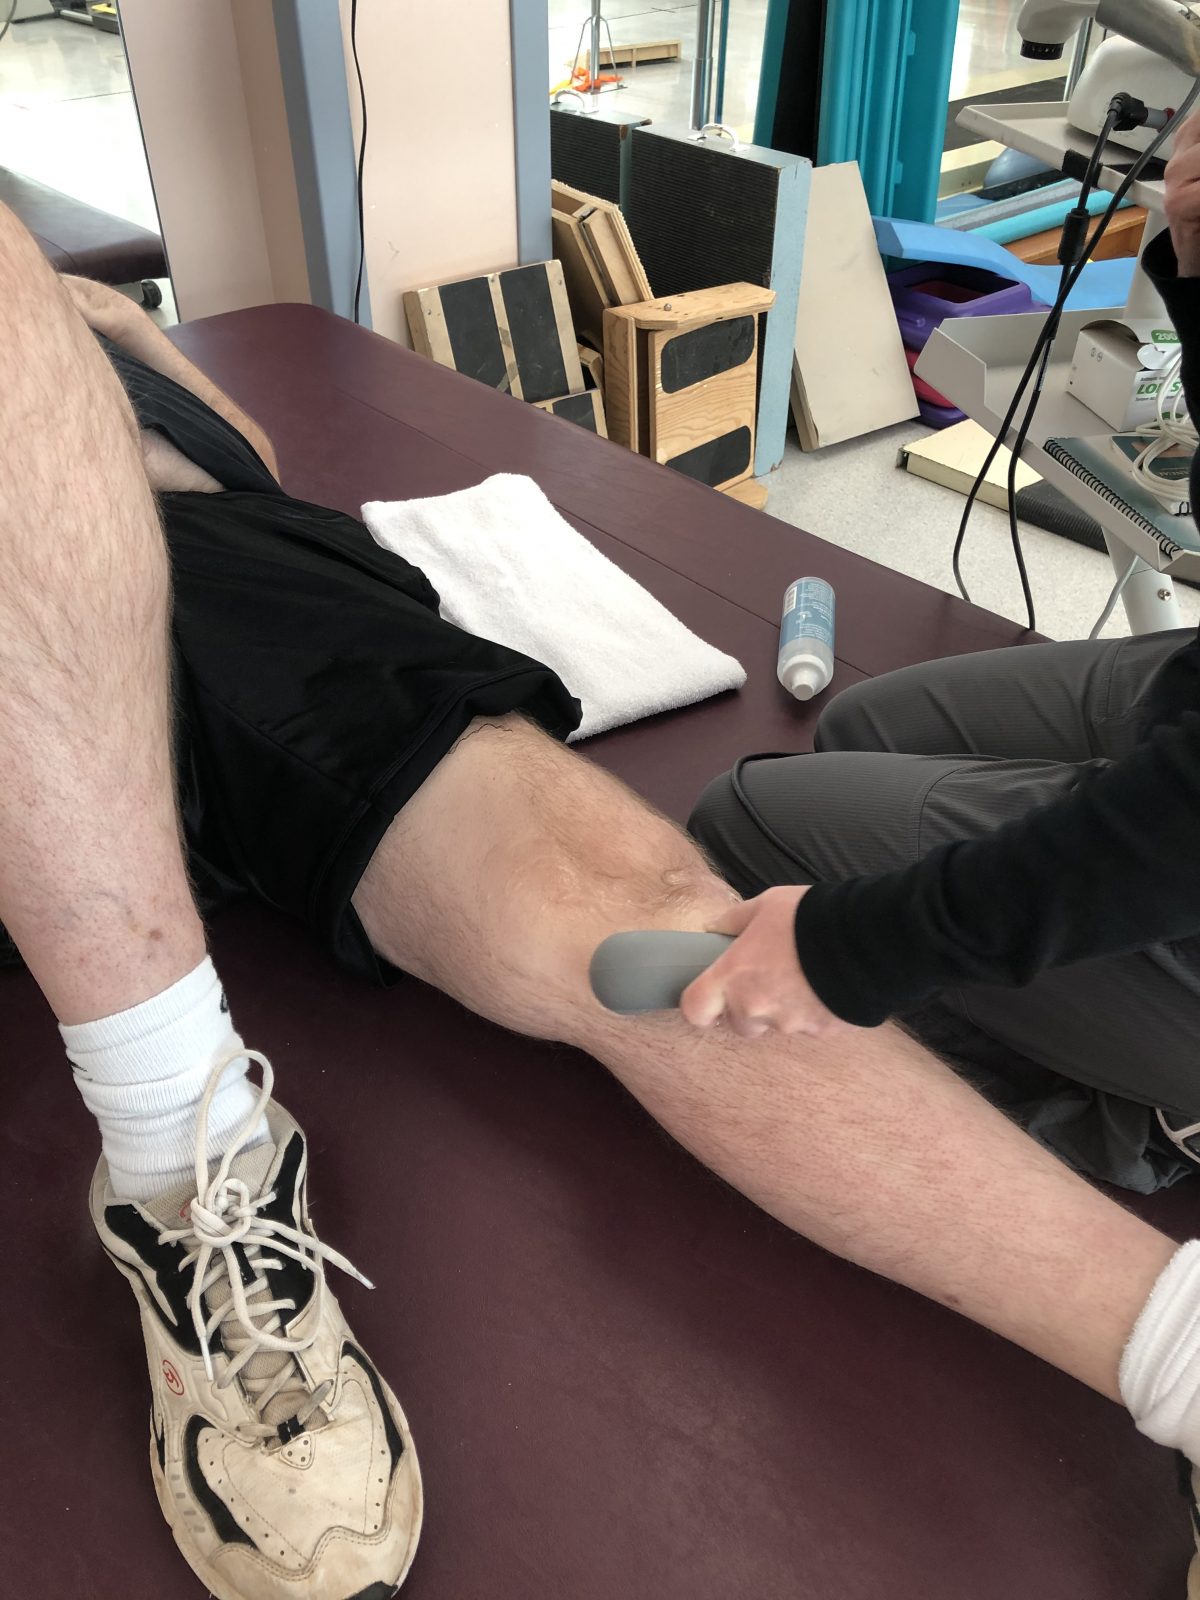 Ultrasound Therapy Kinesiology Taping - Jamie Boyle Guillain Barre Syndrome AMSAN GBS Variant Recovery Progress